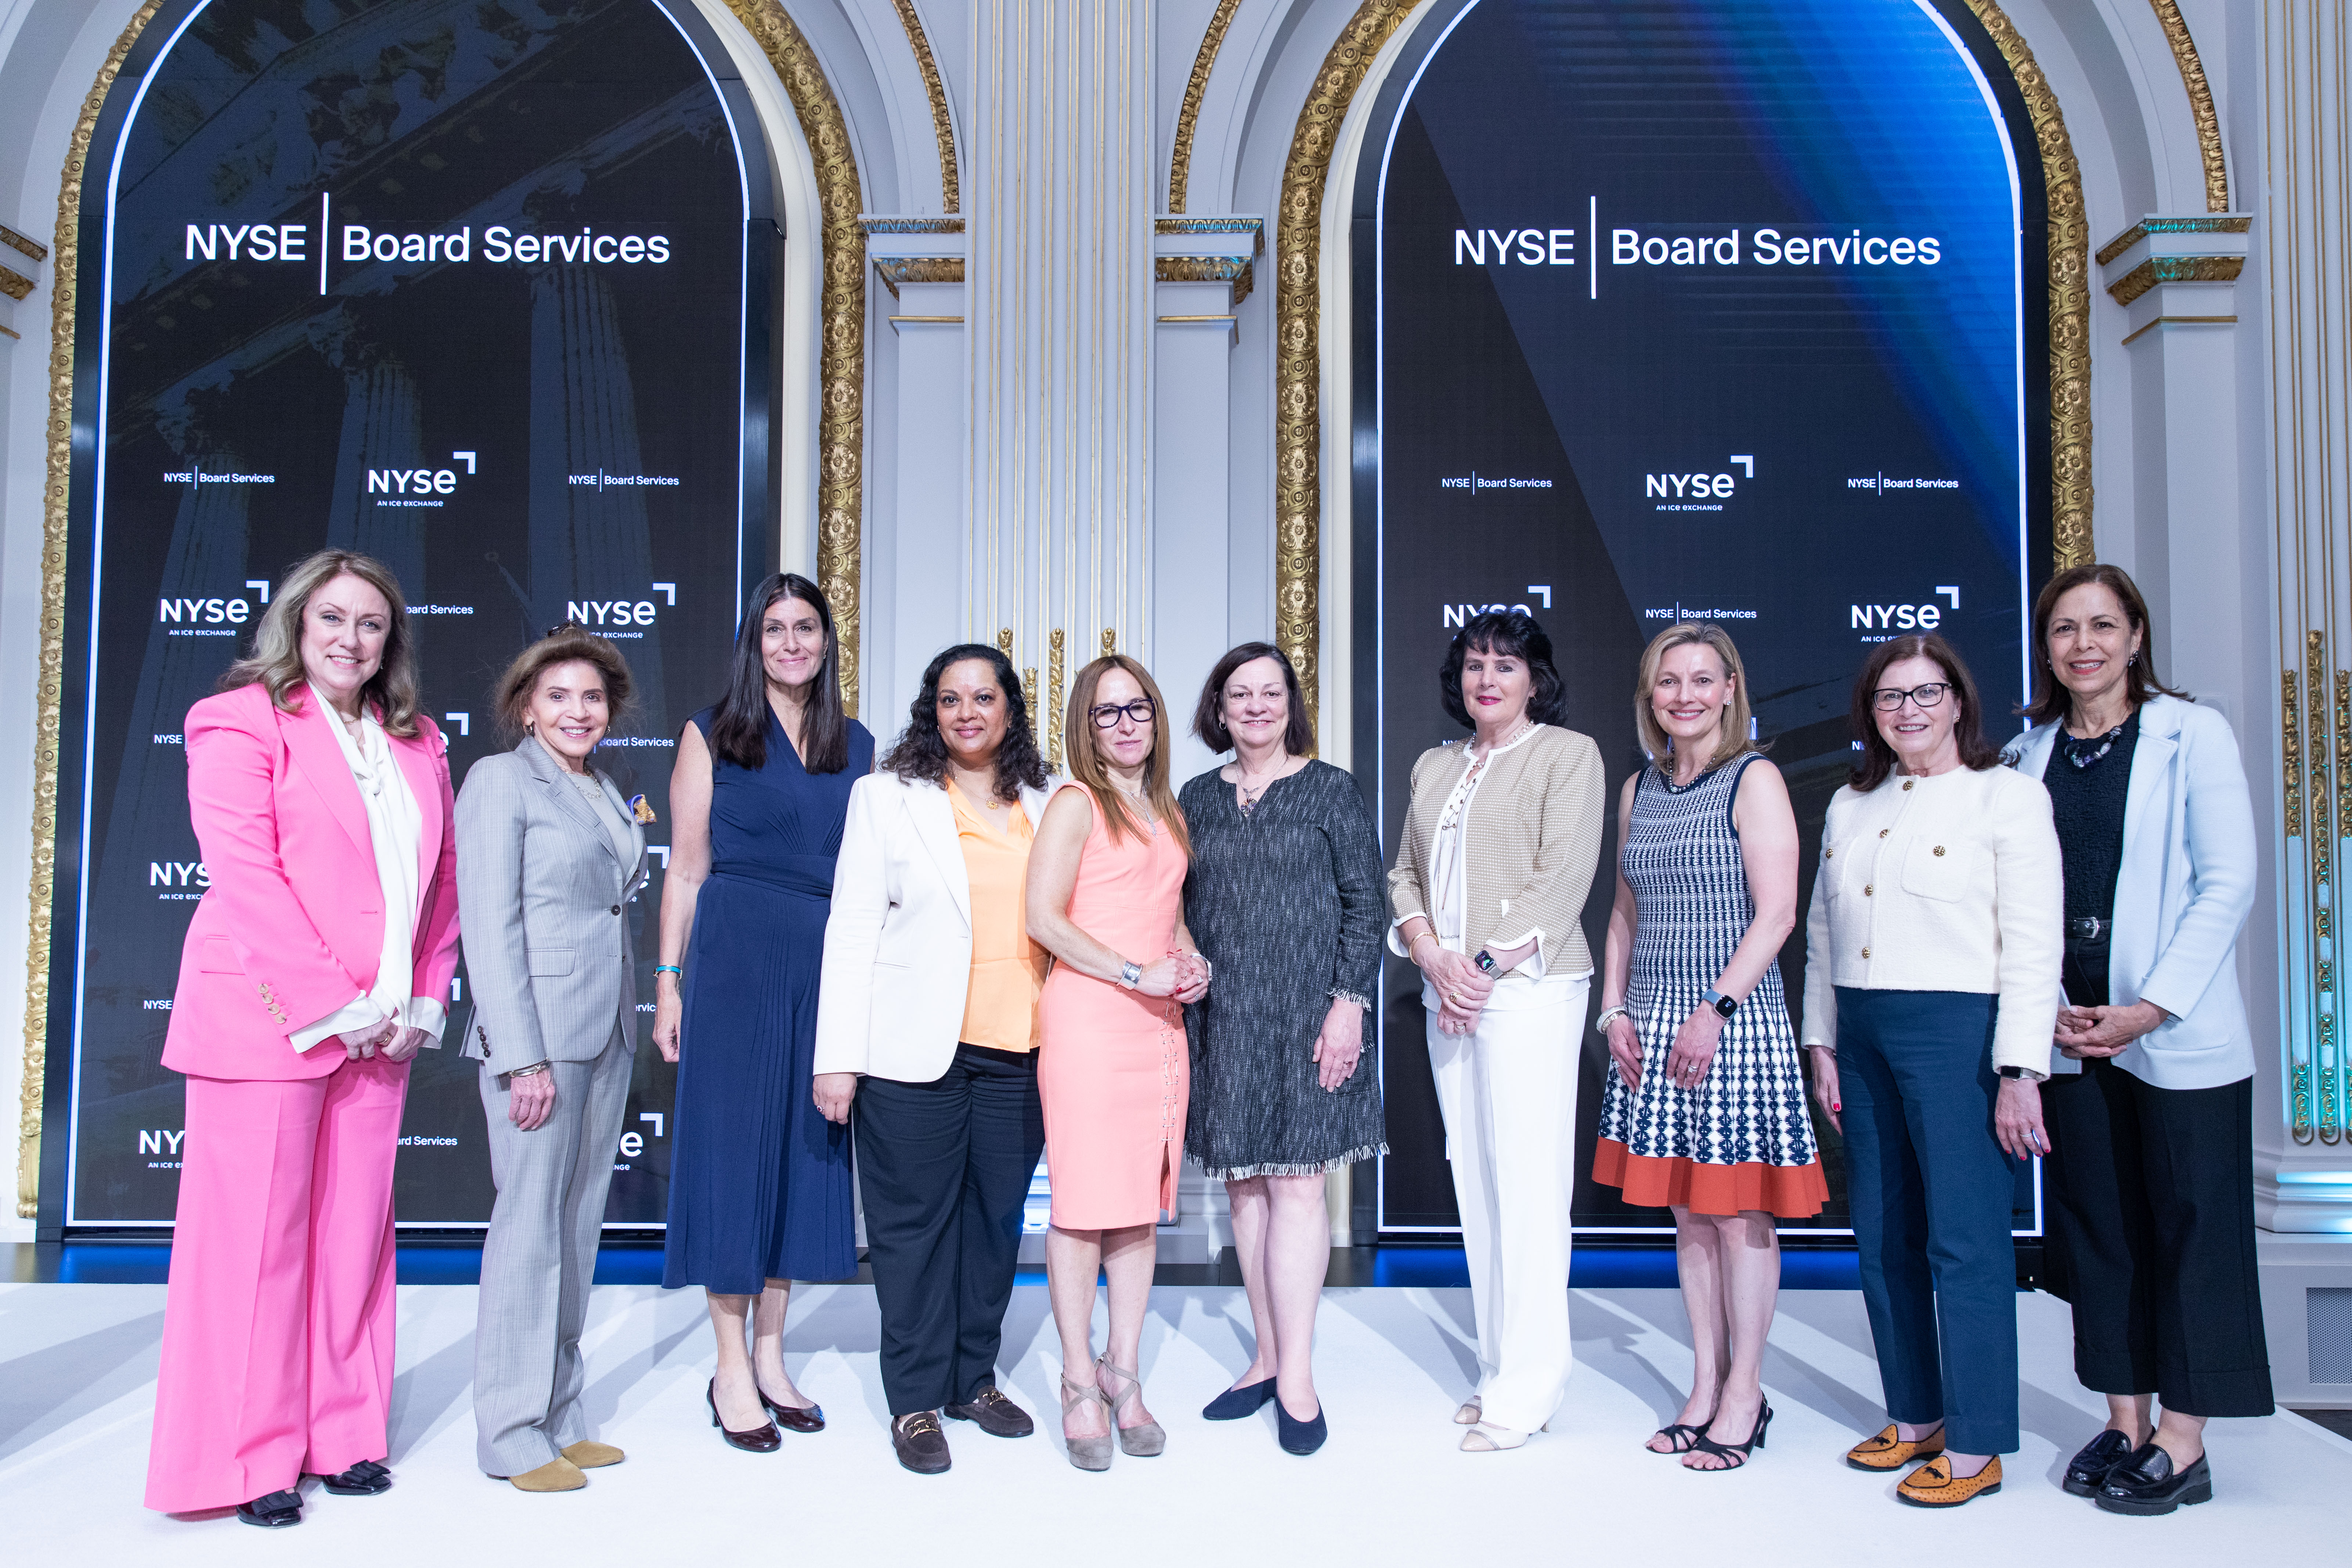 Members of Extraordinary Women on Boards (EWOB) at the NYSE Board Services 5th Anniversary Celebration